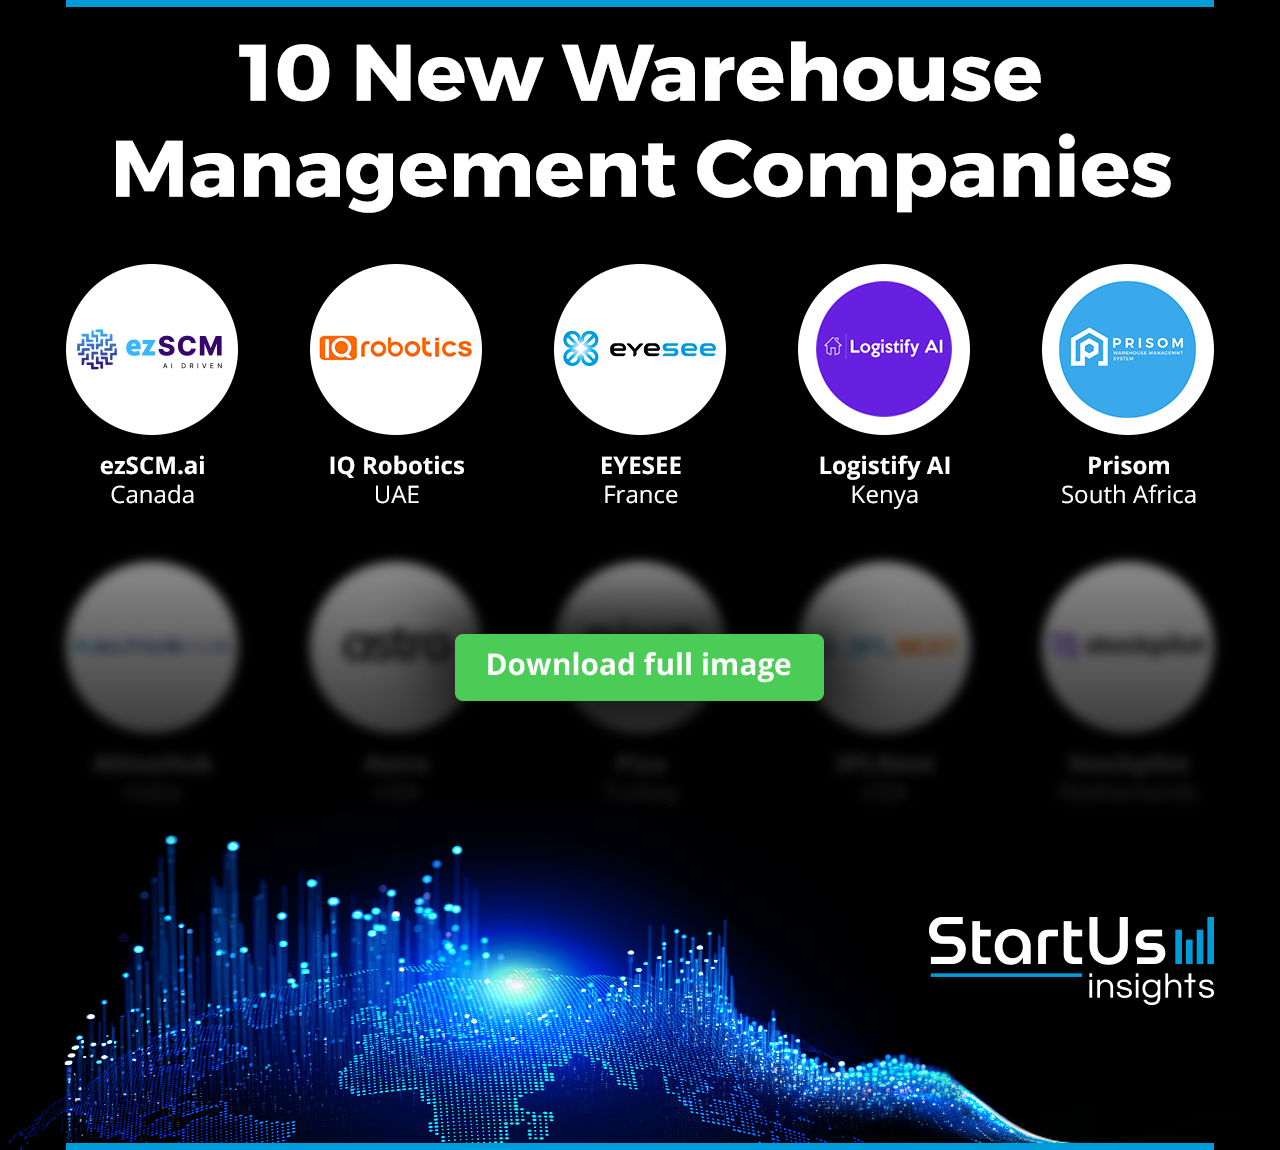 New-Warehouse-Management-Companies-Logos-Blurred-StartUs-Insights-noresize